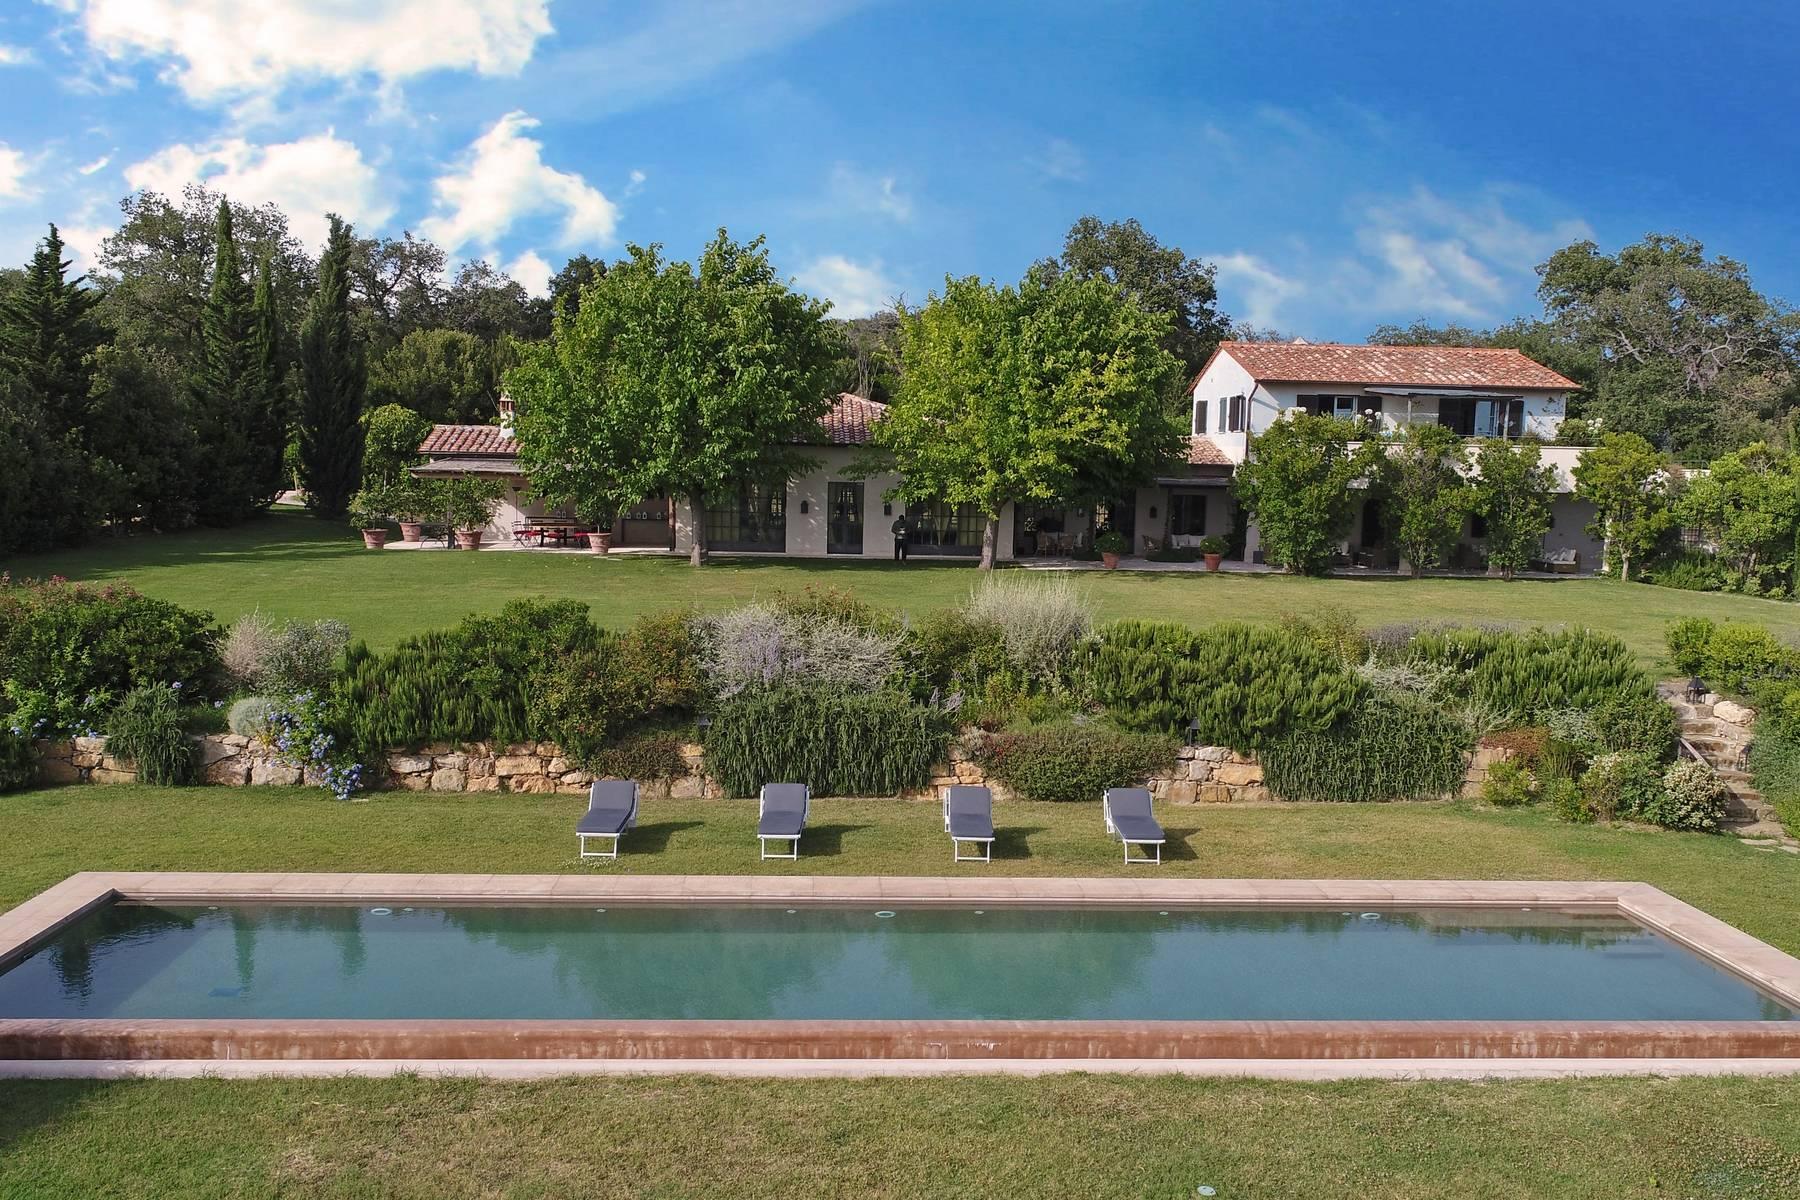 Stylish villa at Capalbio with beautiful views of the Tuscan hills and sea - 1